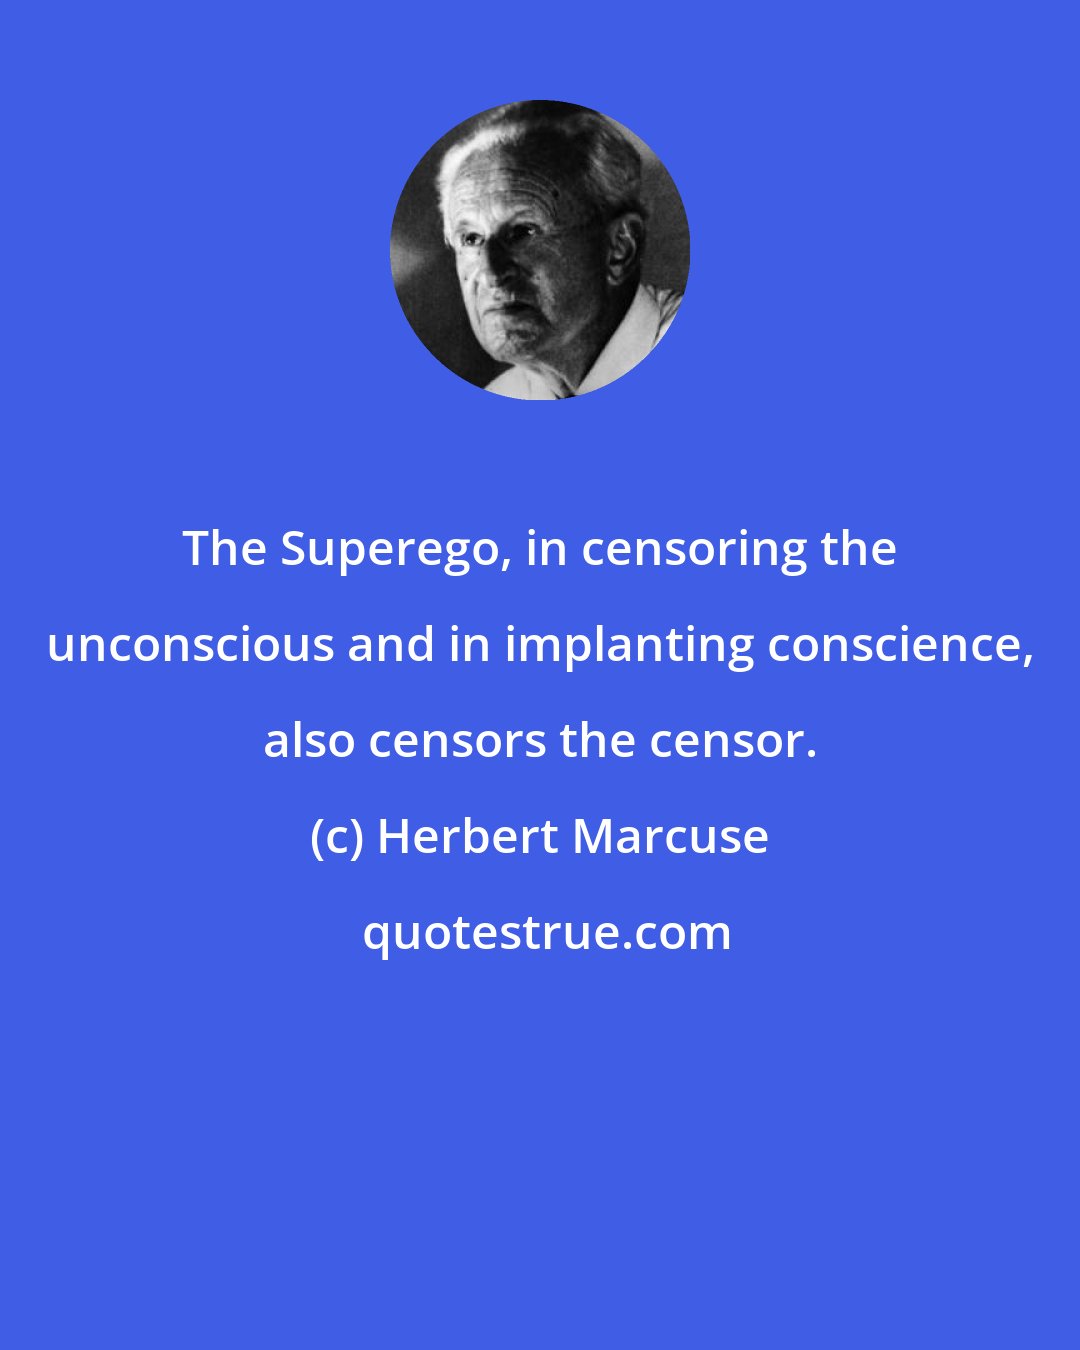 Herbert Marcuse: The Superego, in censoring the unconscious and in implanting conscience, also censors the censor.